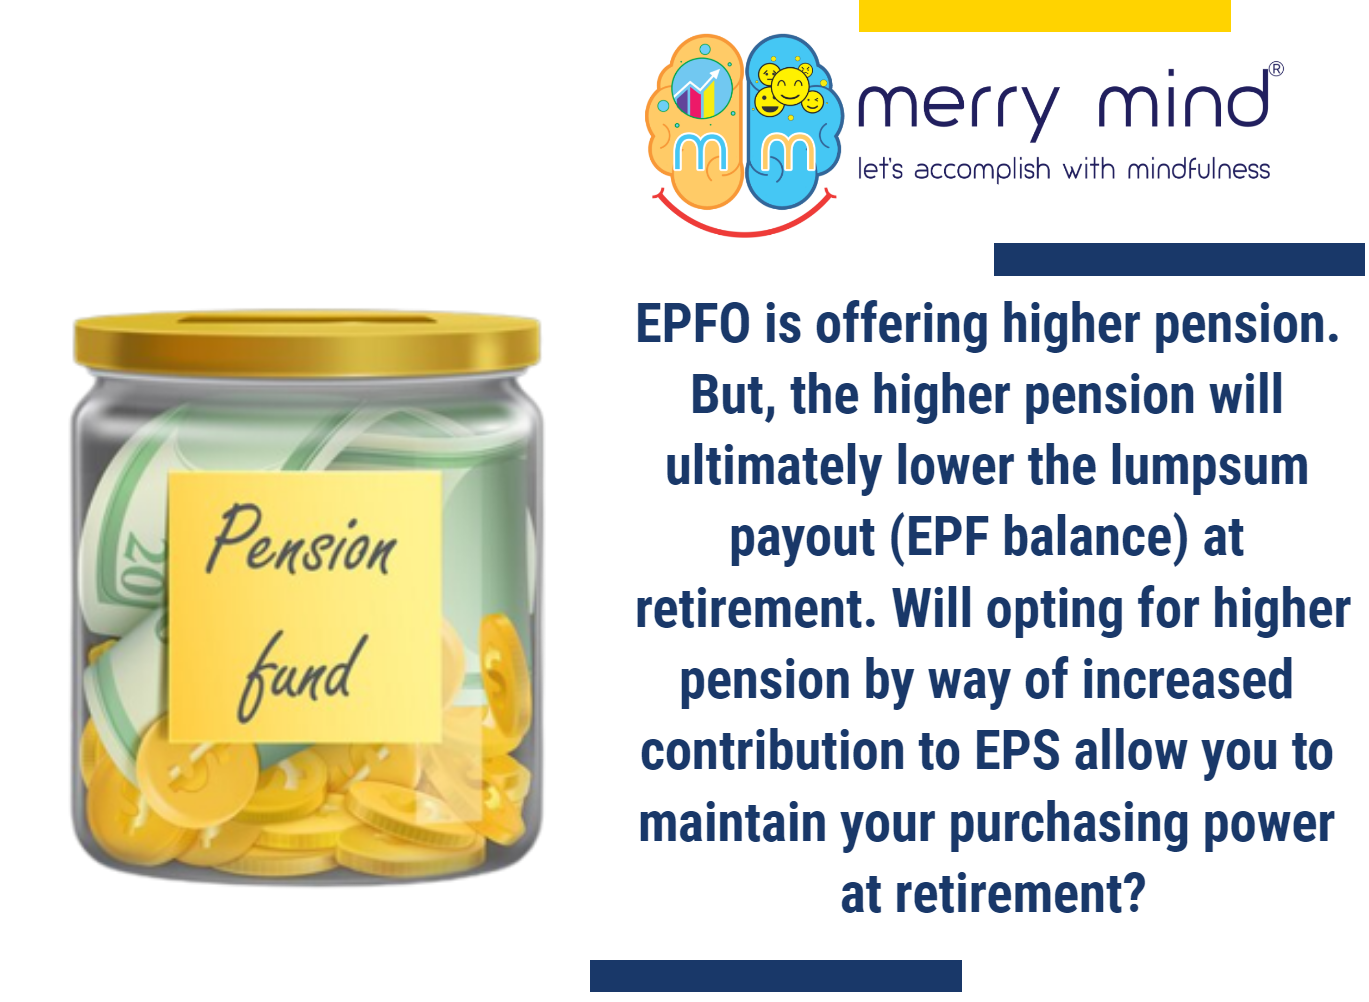 Should you opt out of higher pension offered by EPFO?